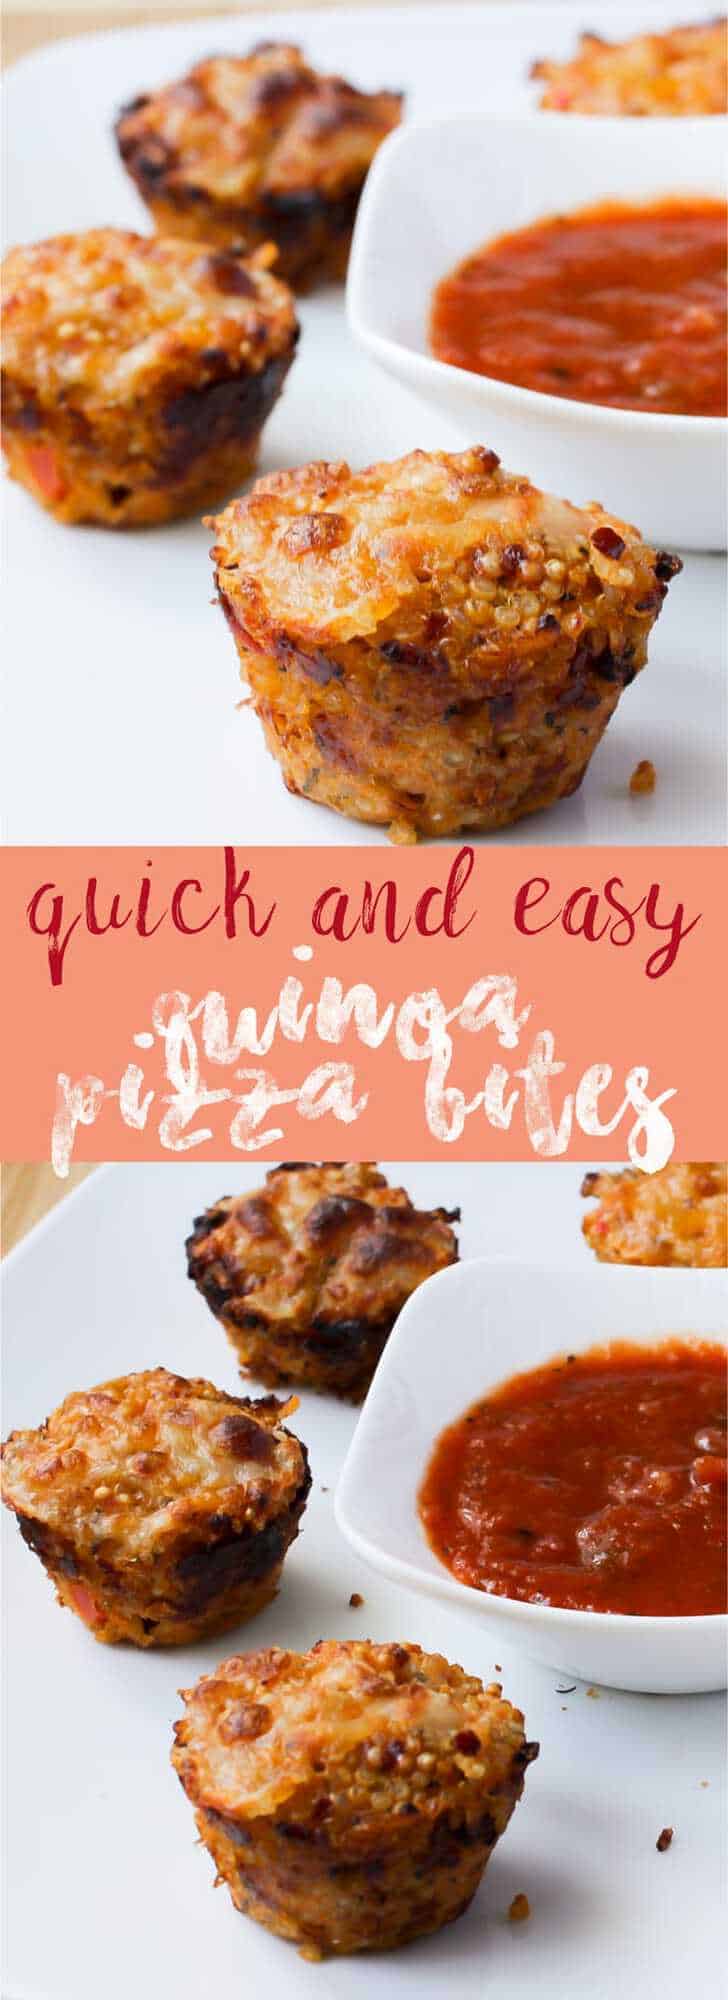 These Easy Quinoa Pizza Bites will satisfy your every pizza cravings. They are protein packed, delicious, and great for parties! via https://jessicainthekitchen.com